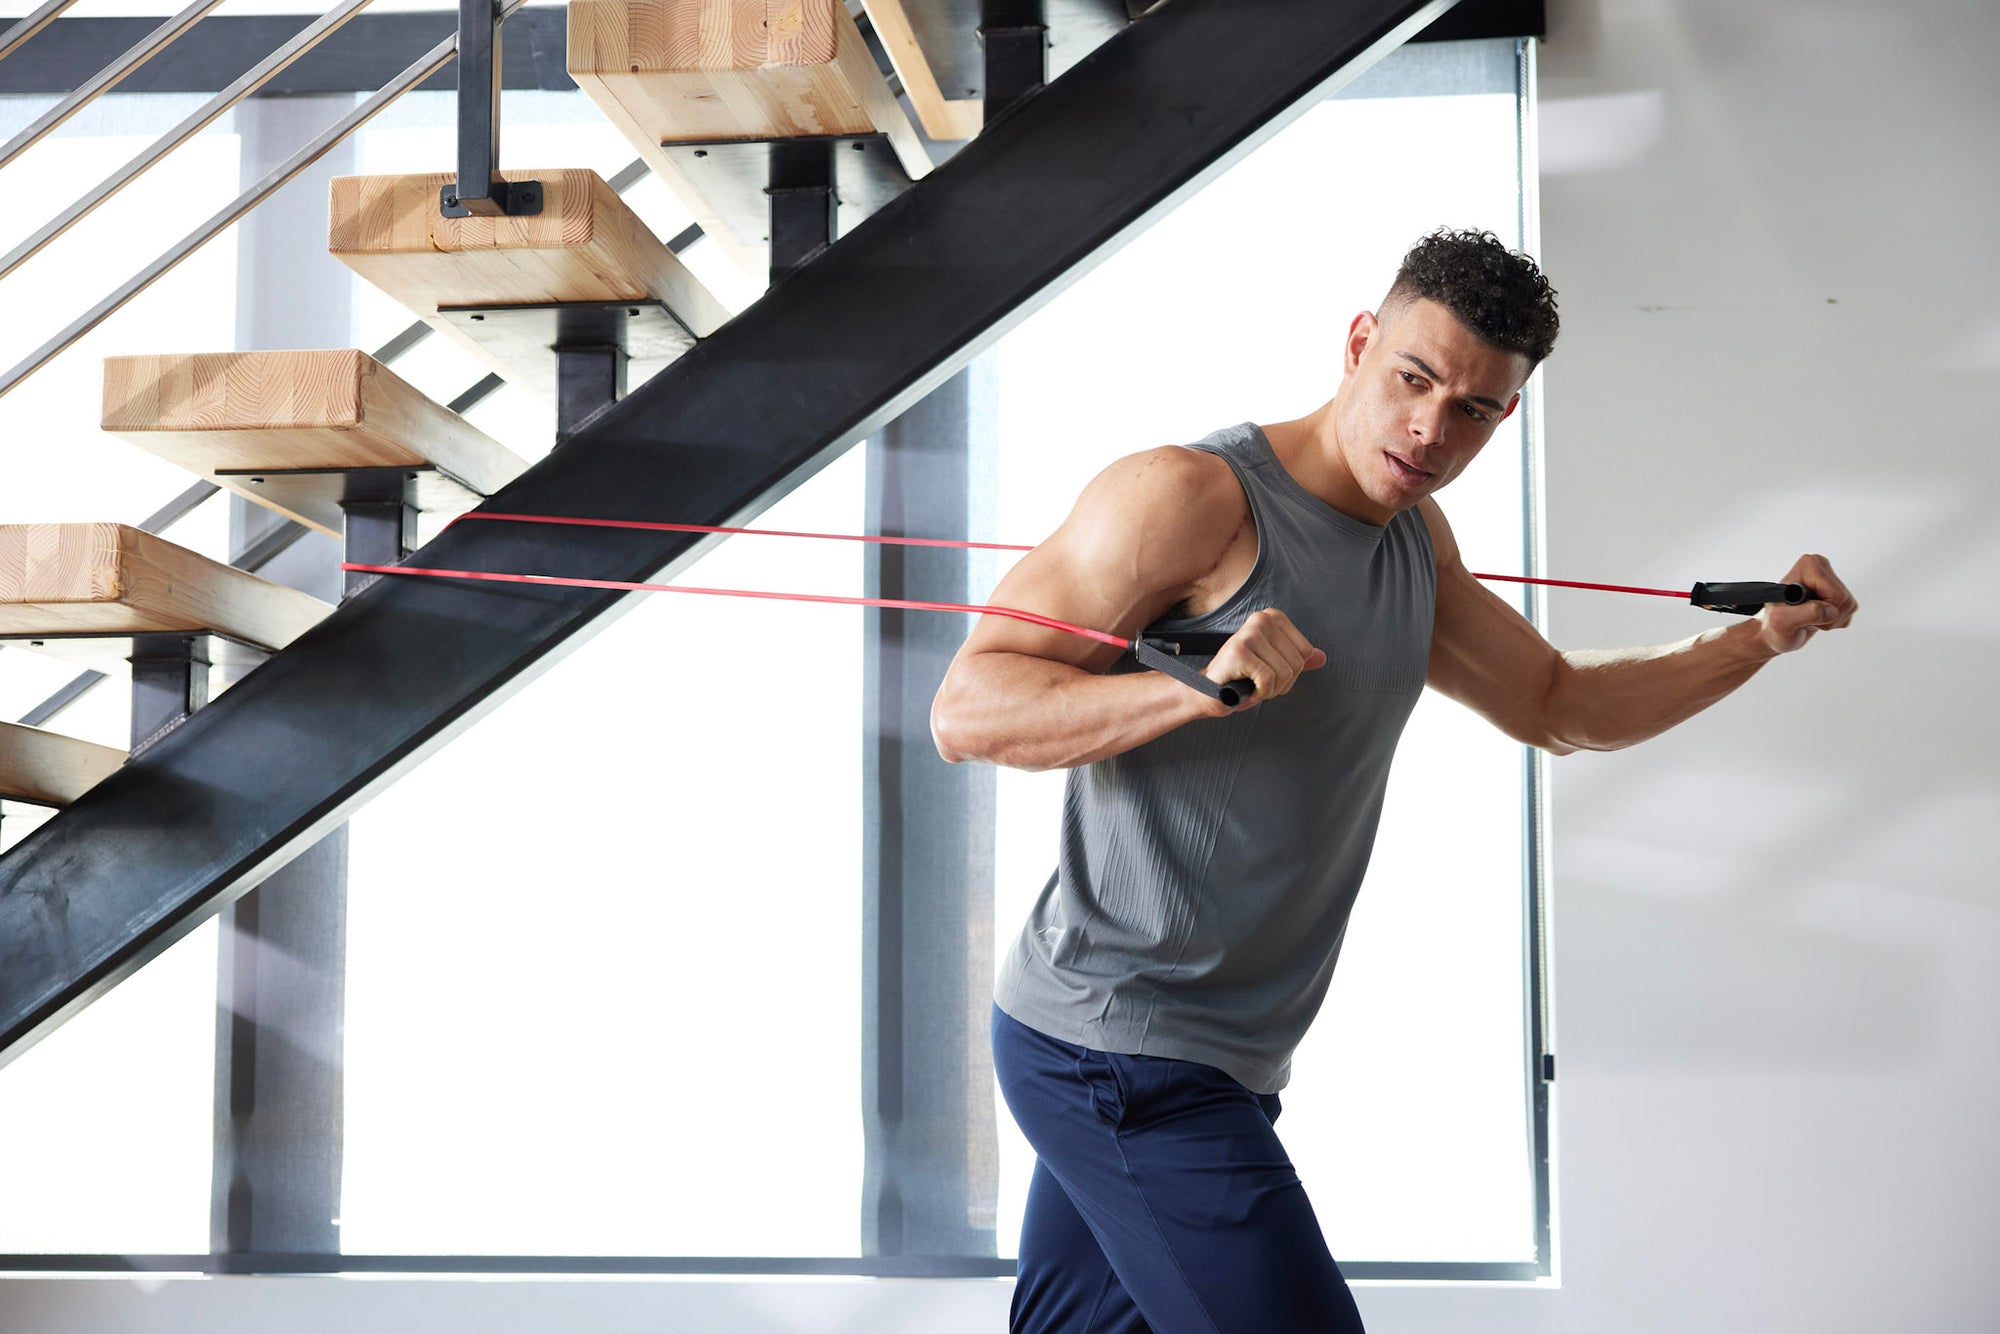 Resistance band workouts are everywhere – but do they work?